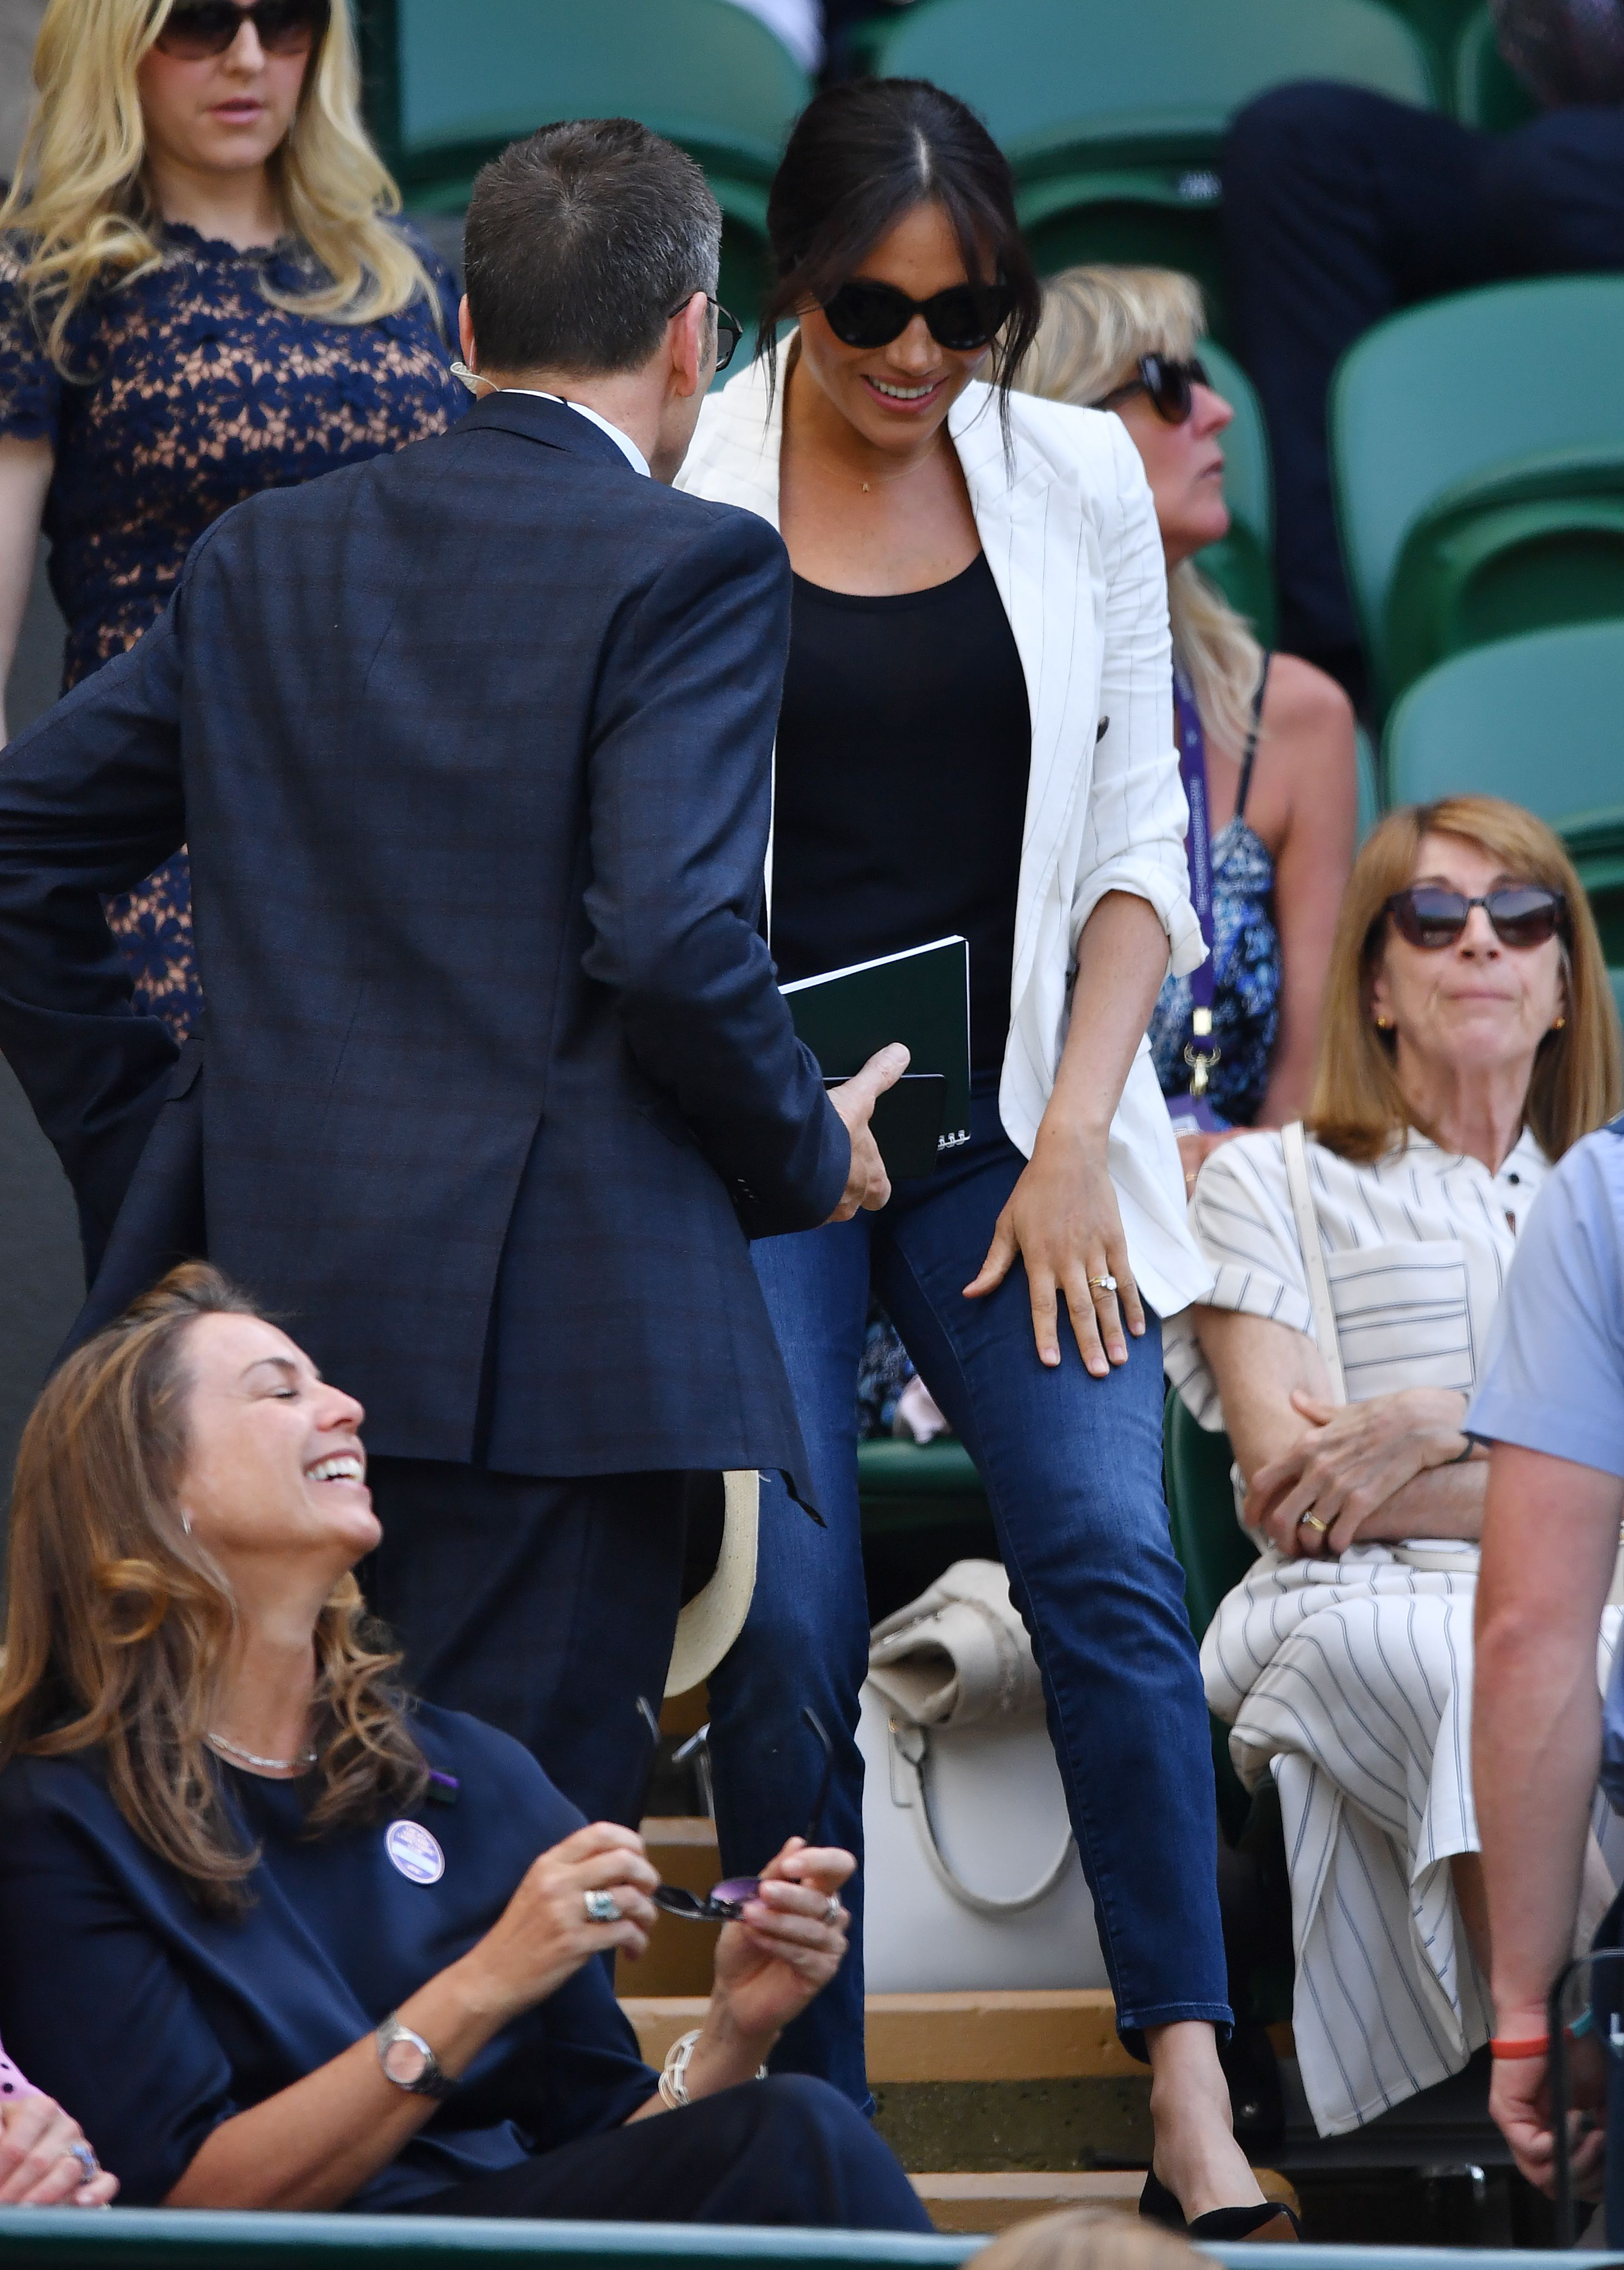 Britain's Meghan, Duchess of Sussex arrives to watch US player Serena Williams playing against Slovakia's Kaja Juvan during their women's singles second round match on the fourth day of the 2019 Wimbledon Championships at The All England Lawn Tennis Club in Wimbledon, southwest London, on July 4, 2019. (Photo credit GLYN KIRK/AFP/Getty Images)